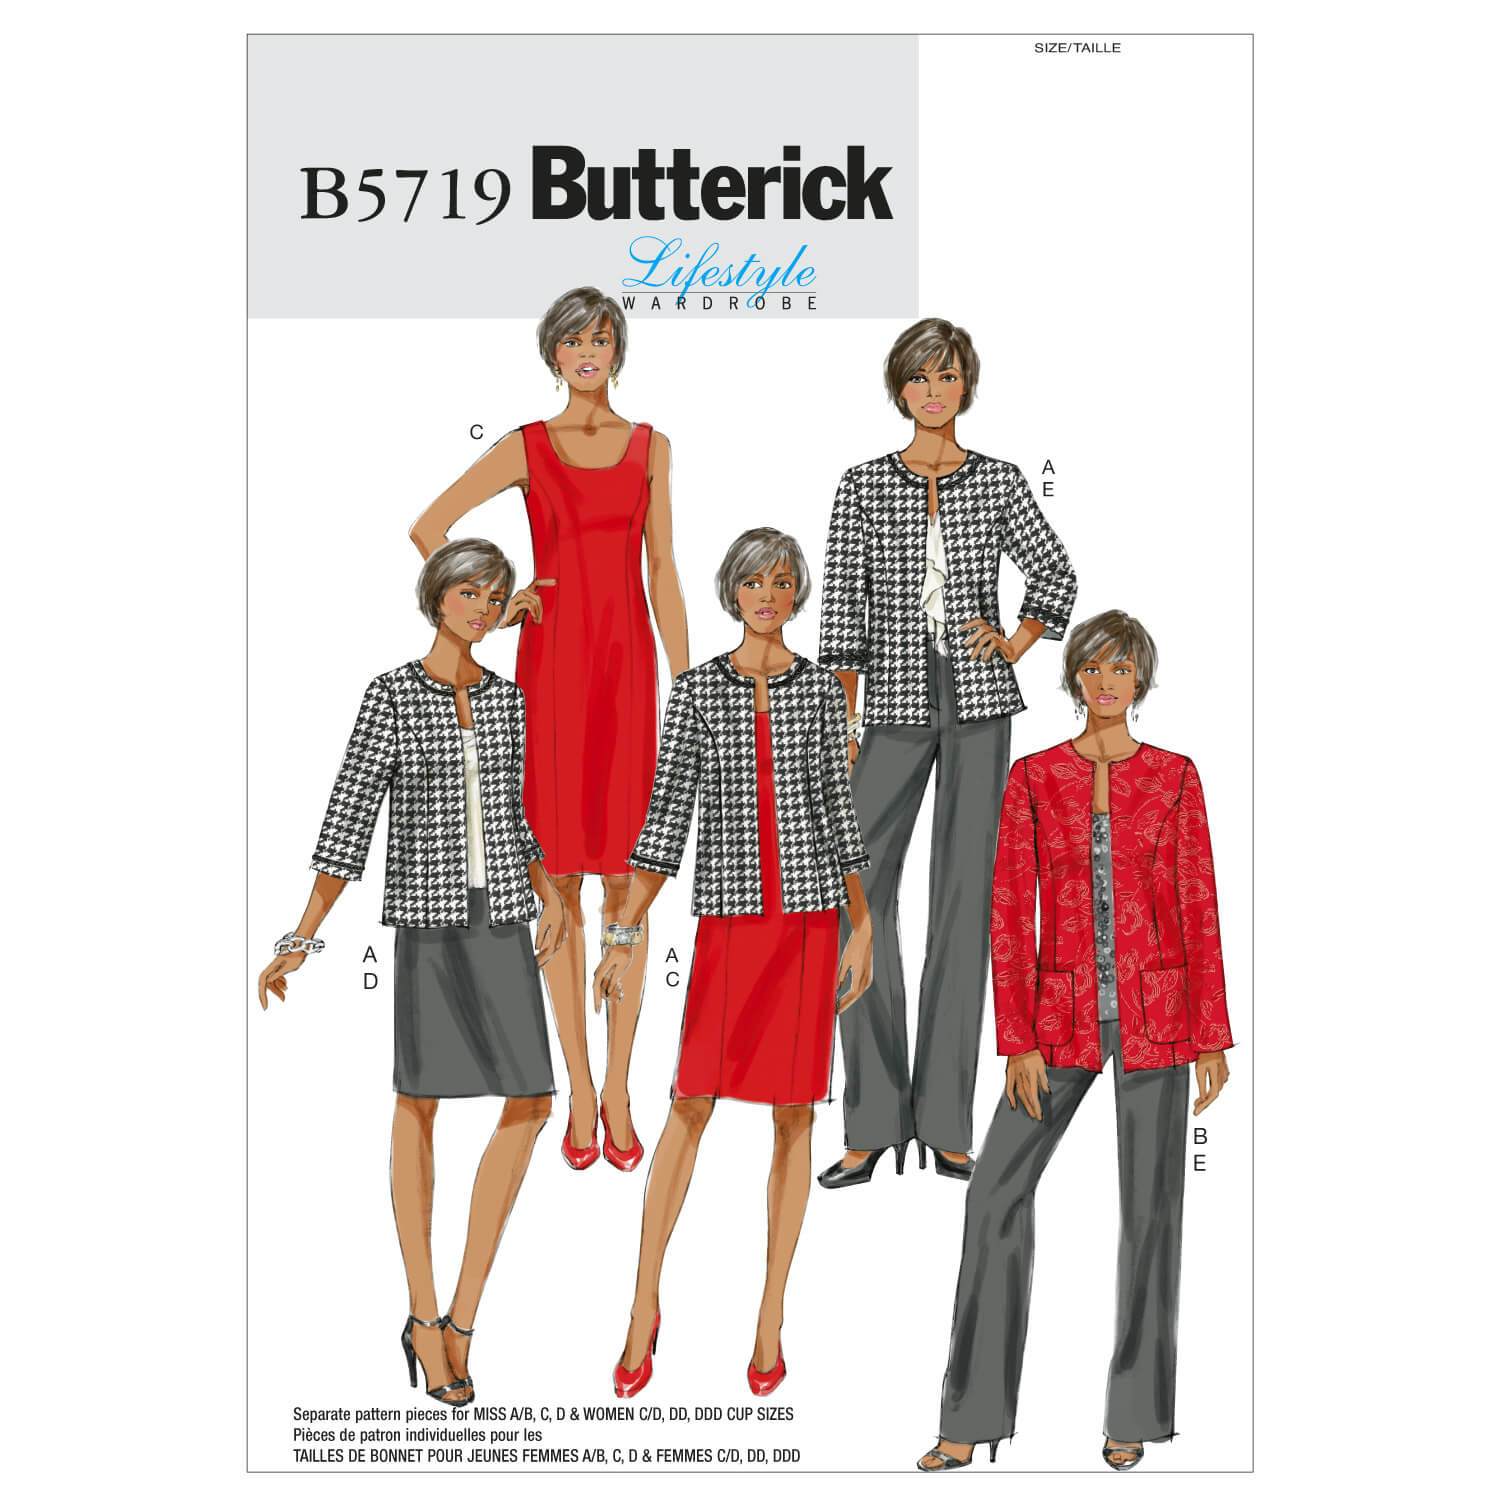 Butterick Sewing Pattern B5719 Misses'/Women's Jacket, Dress, Skirt and Pants